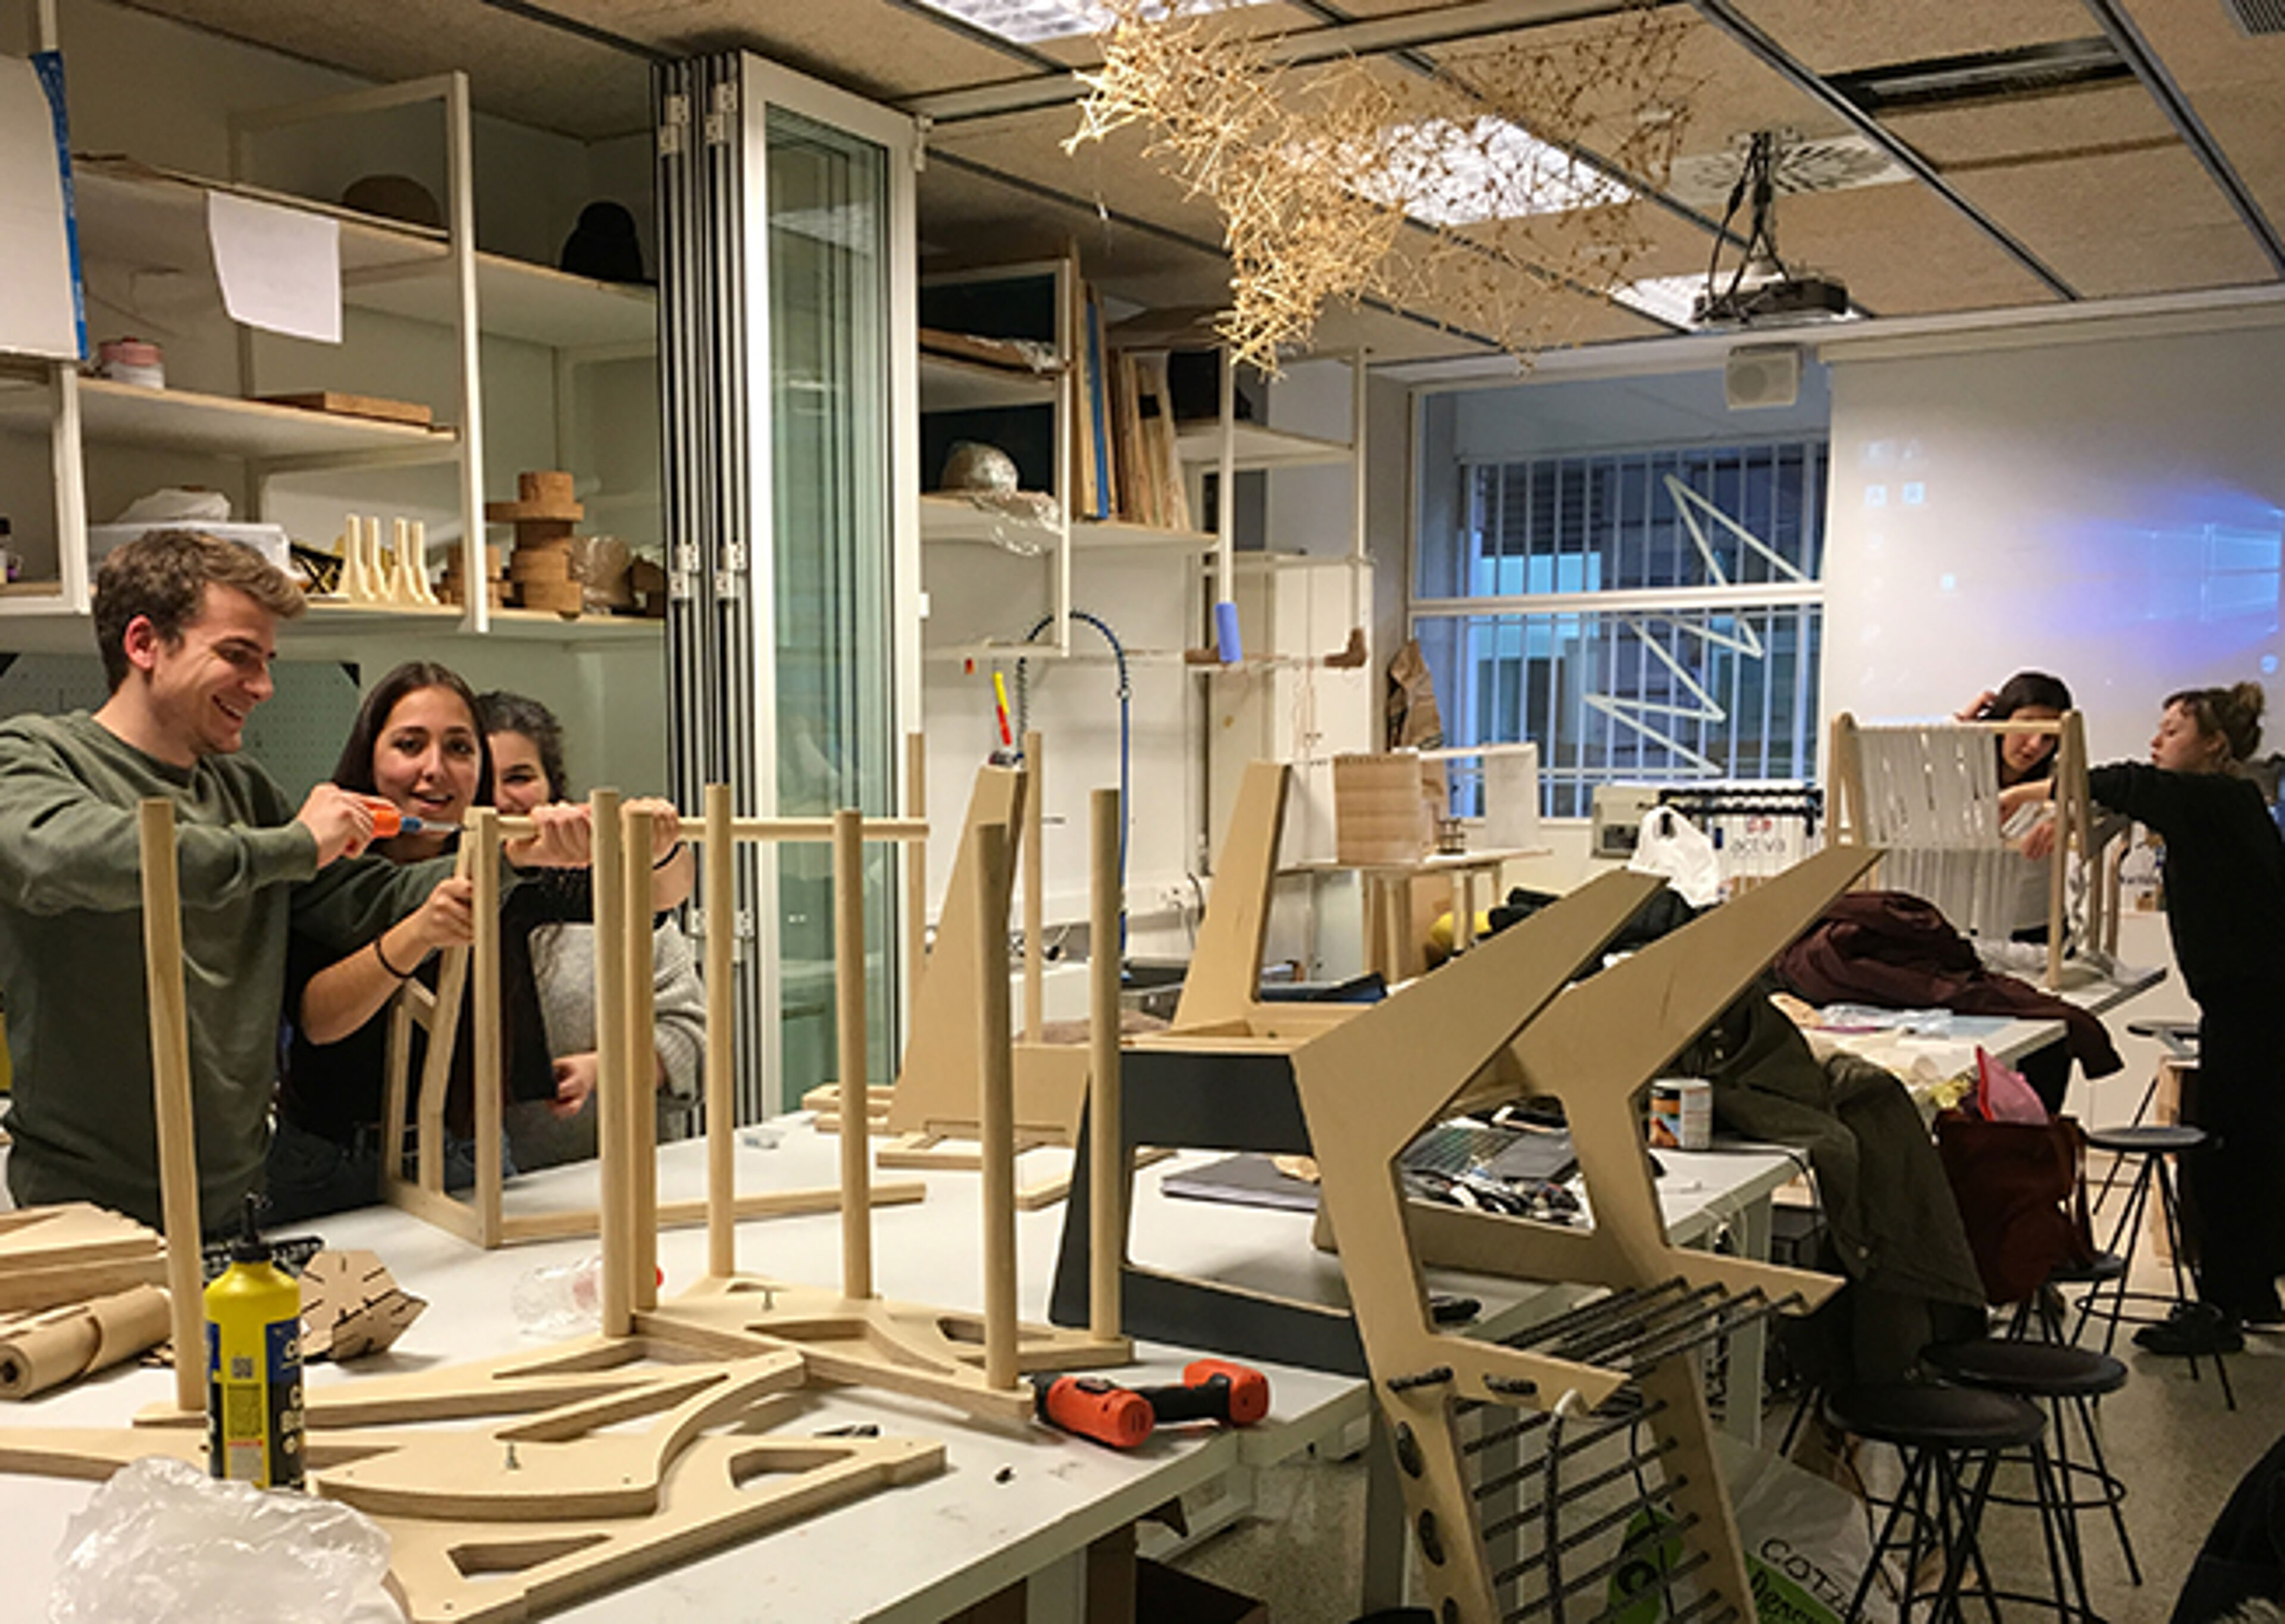 Design students actively engaged in a workshop, crafting models with various tools and materials.